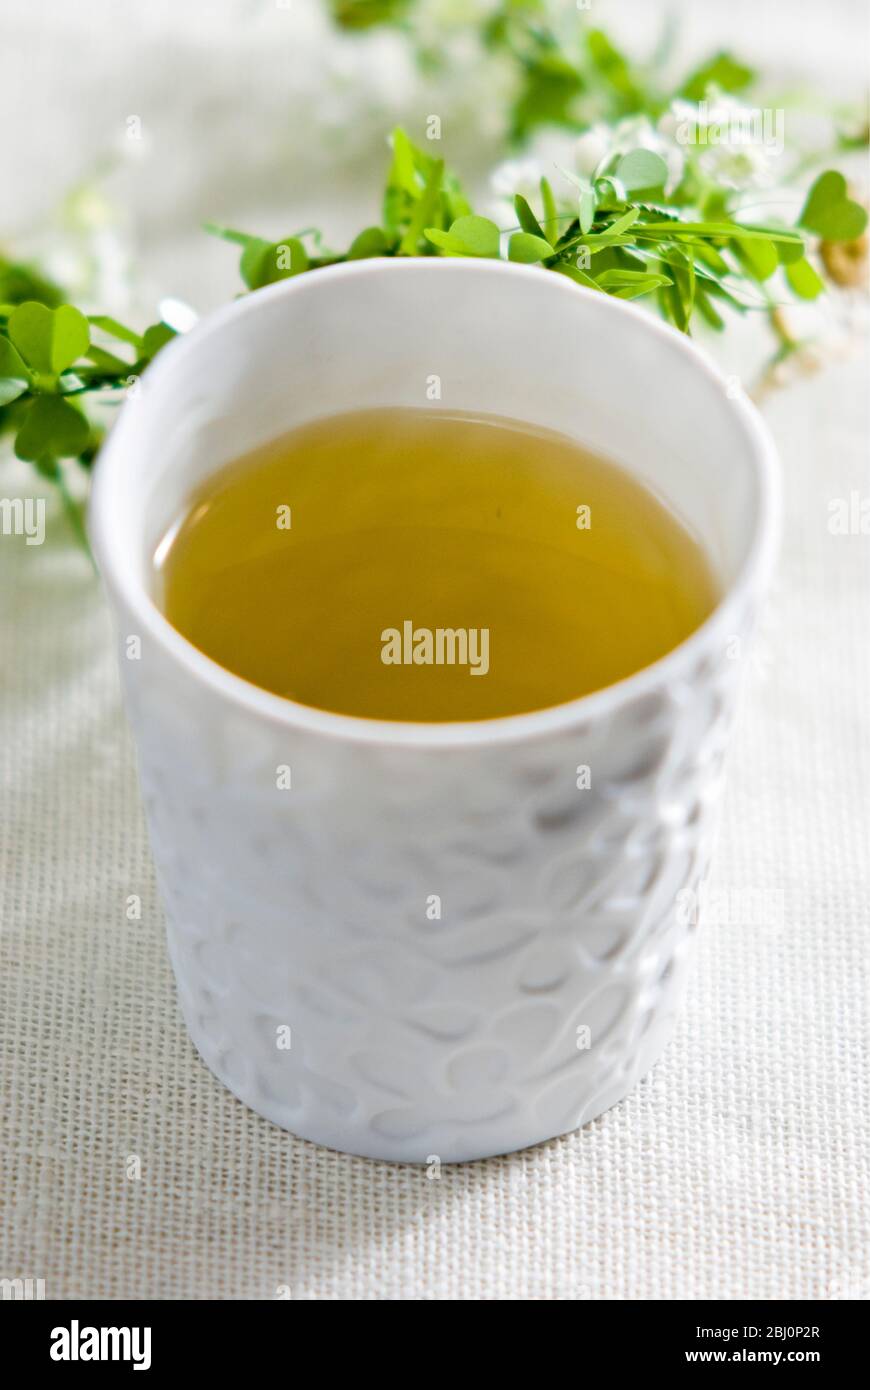 Small porcelain cup of chamomile herb tea - Stock Photo